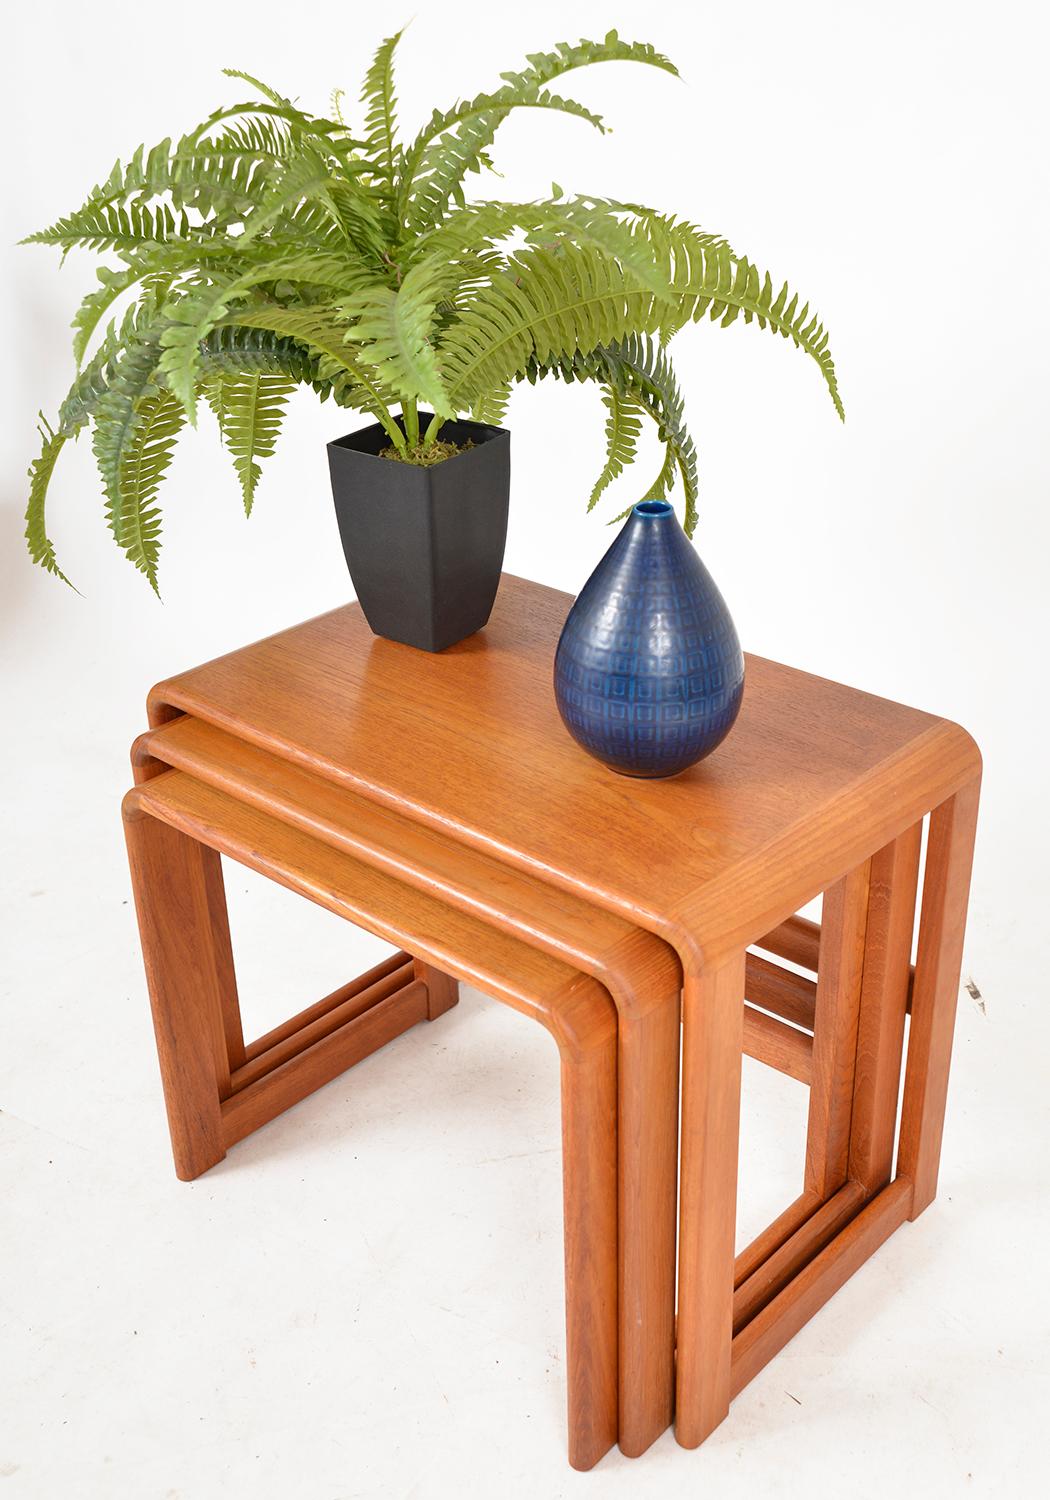 Midcentury Teak Nesting Occasional Tables by O'Donnell Design Irish 1970s Danish For Sale 4